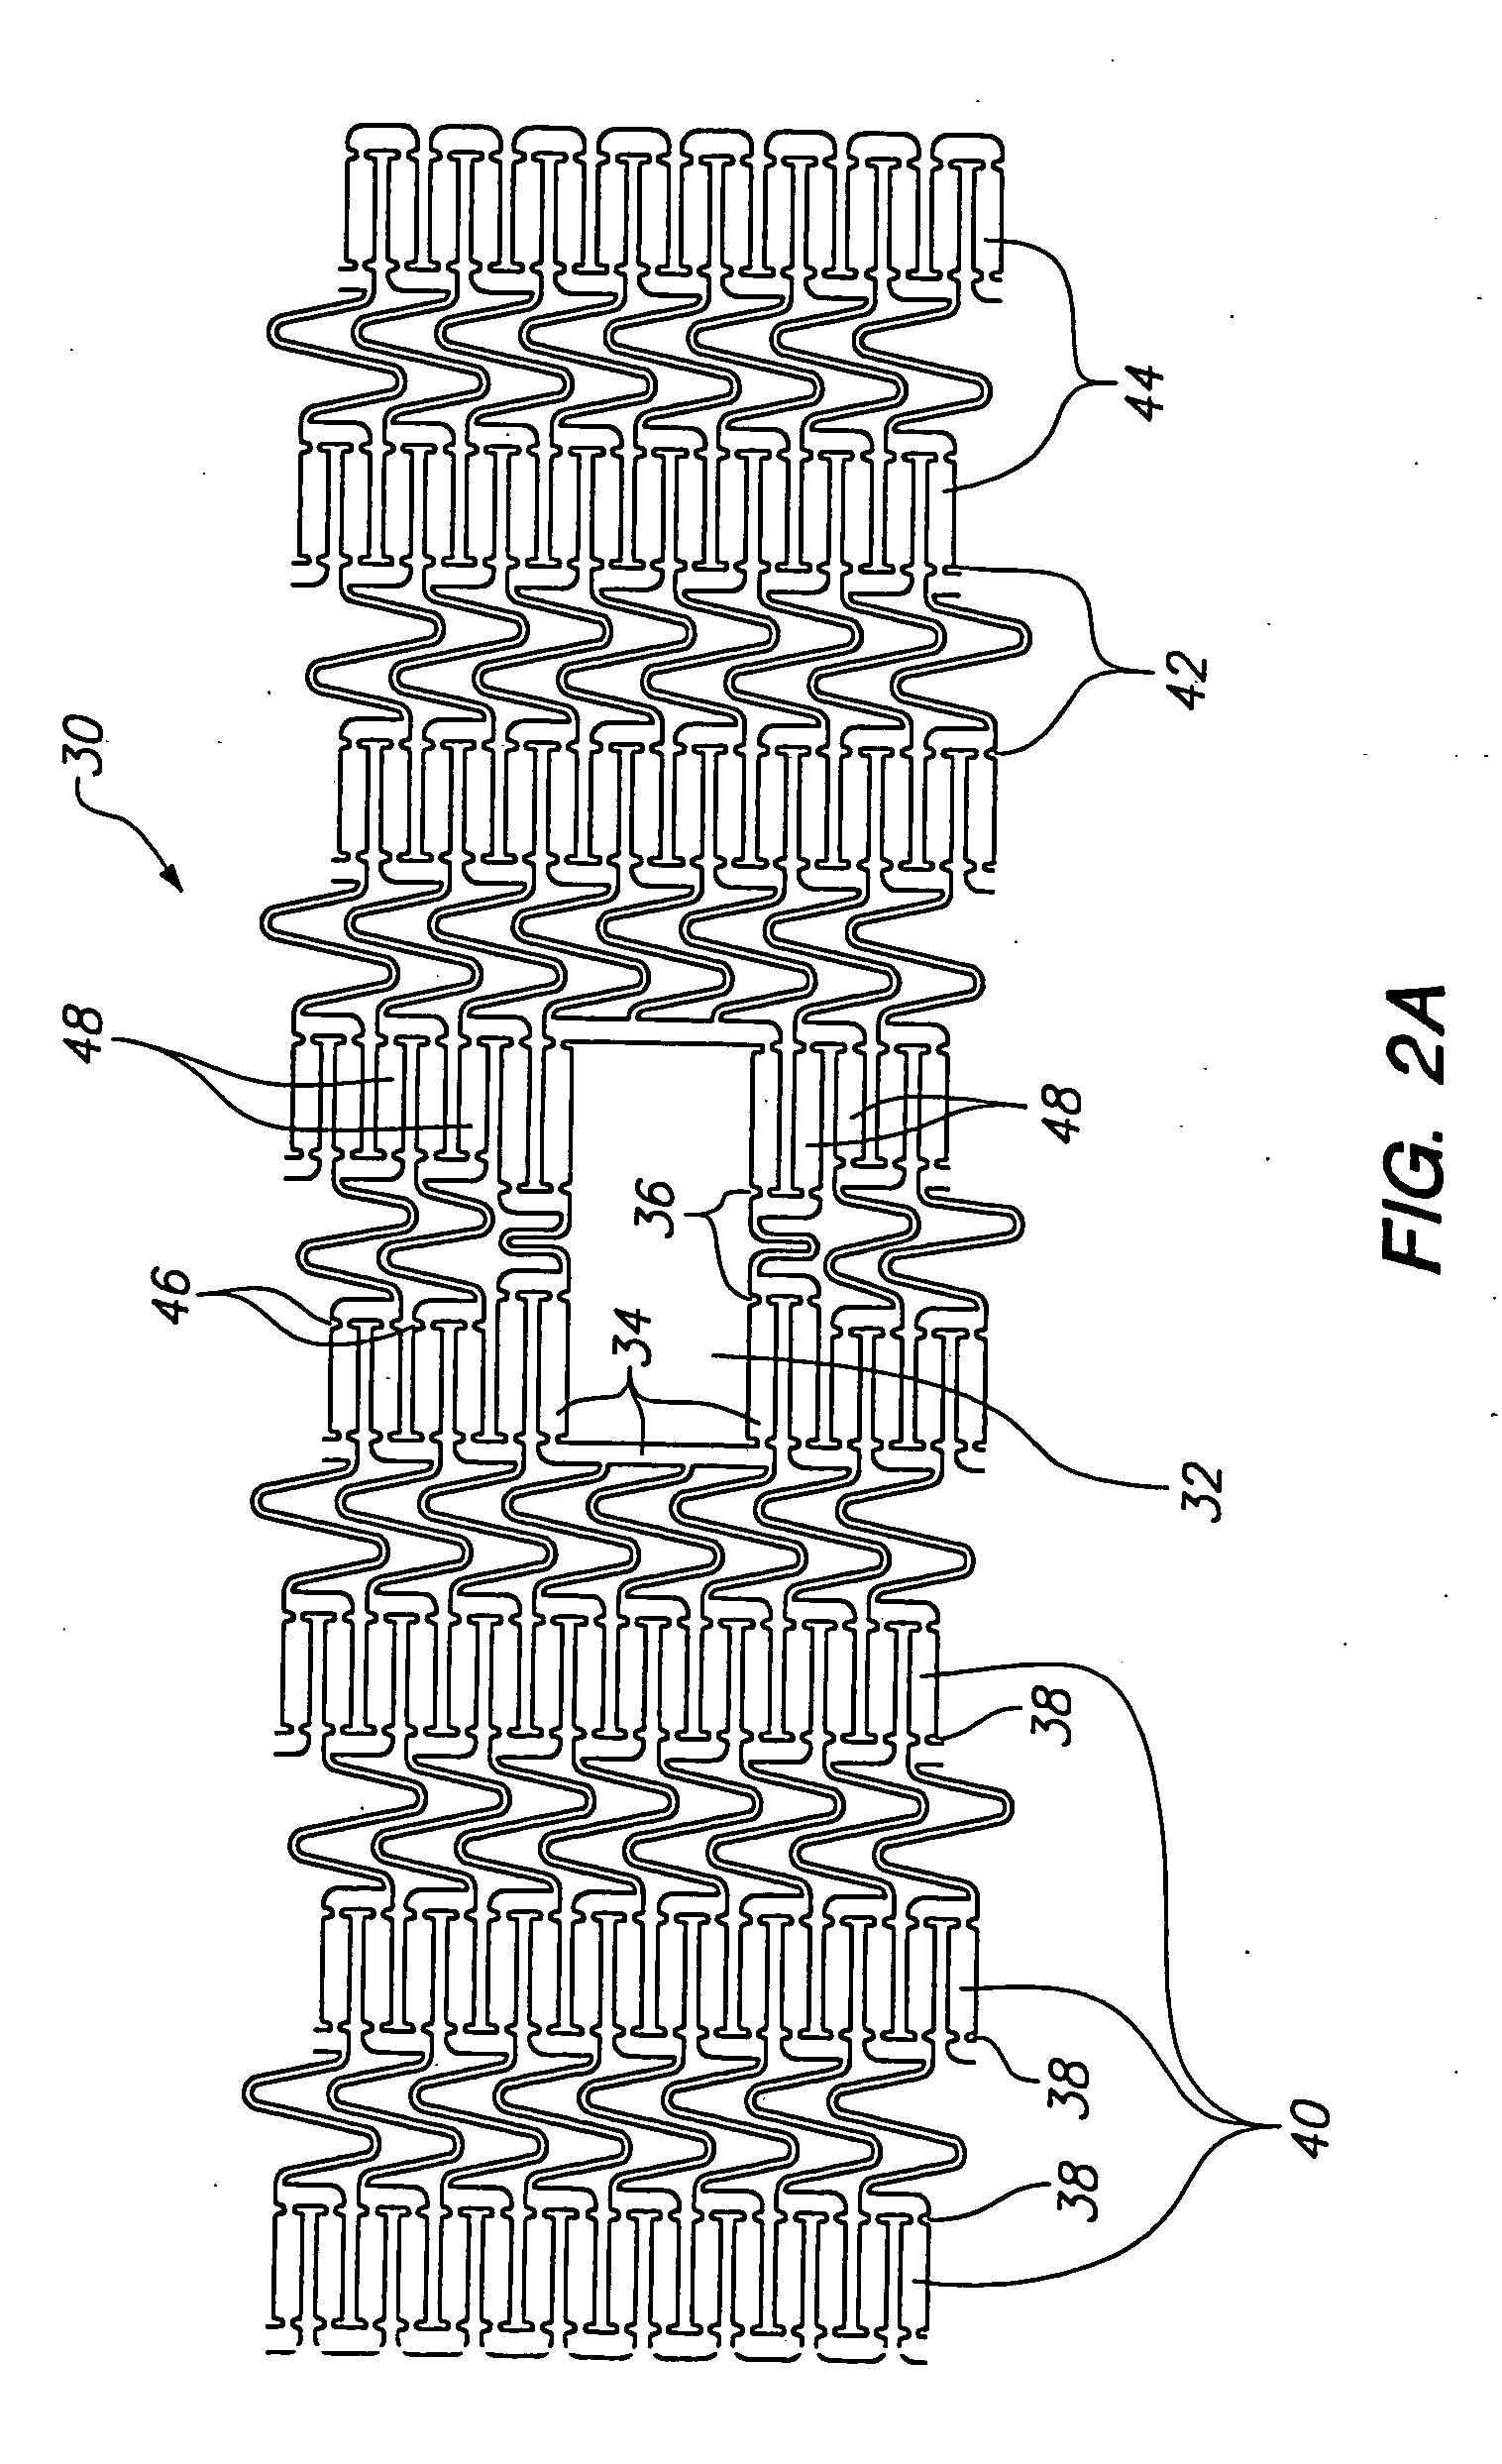 Expandable medical device delivery system and method